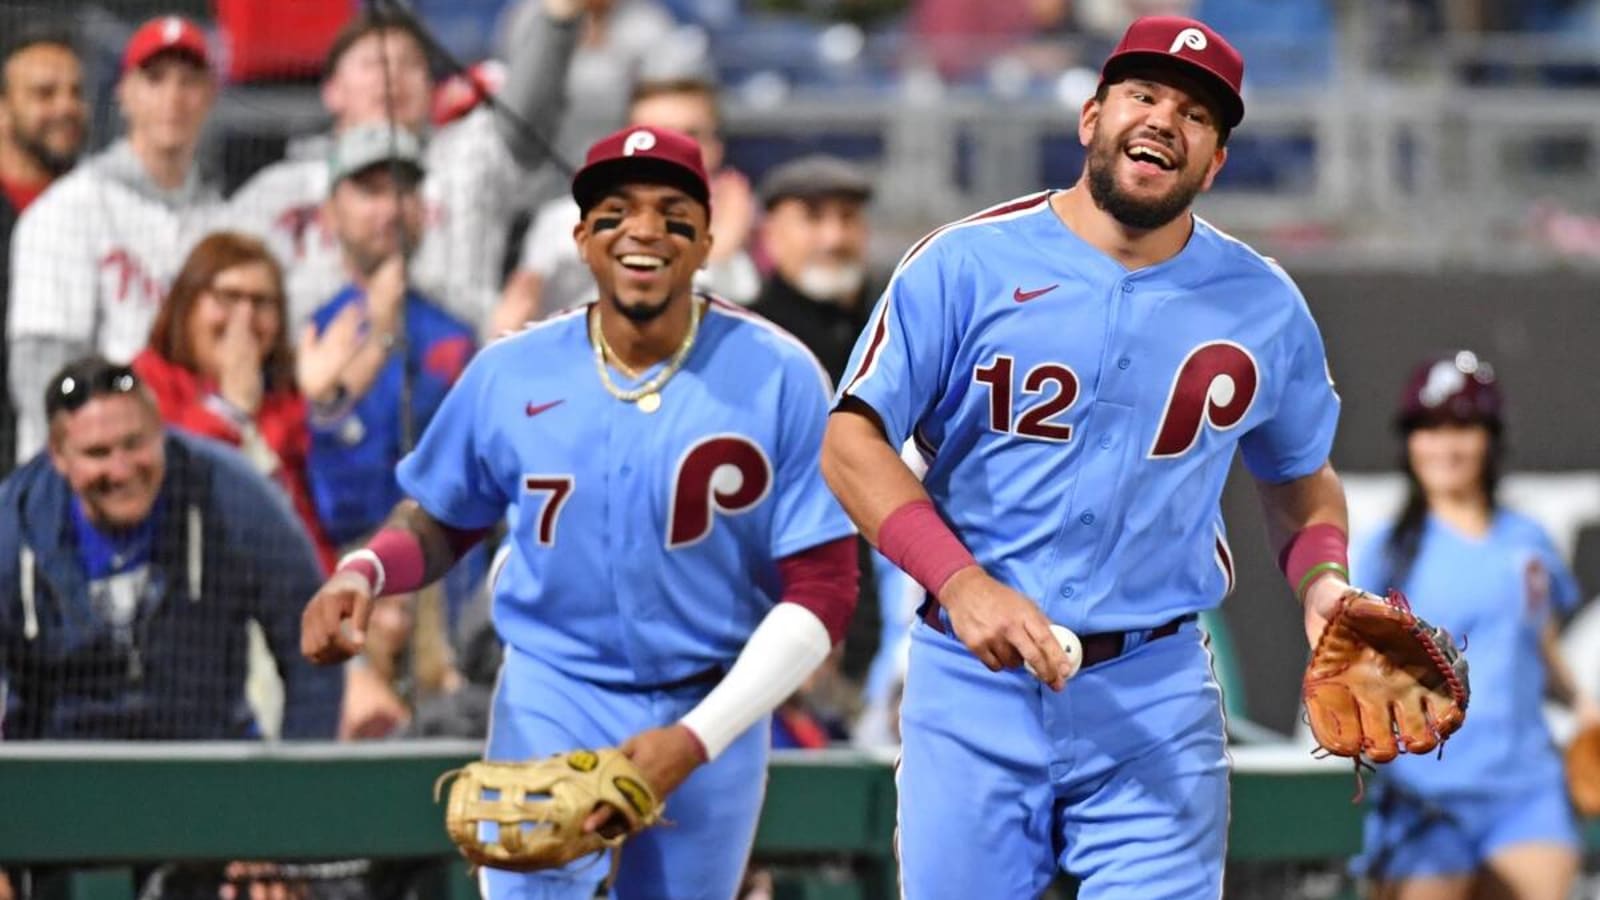 Mets vs. Phillies Live: TV Channel & Streaming Online - 5/7/2022